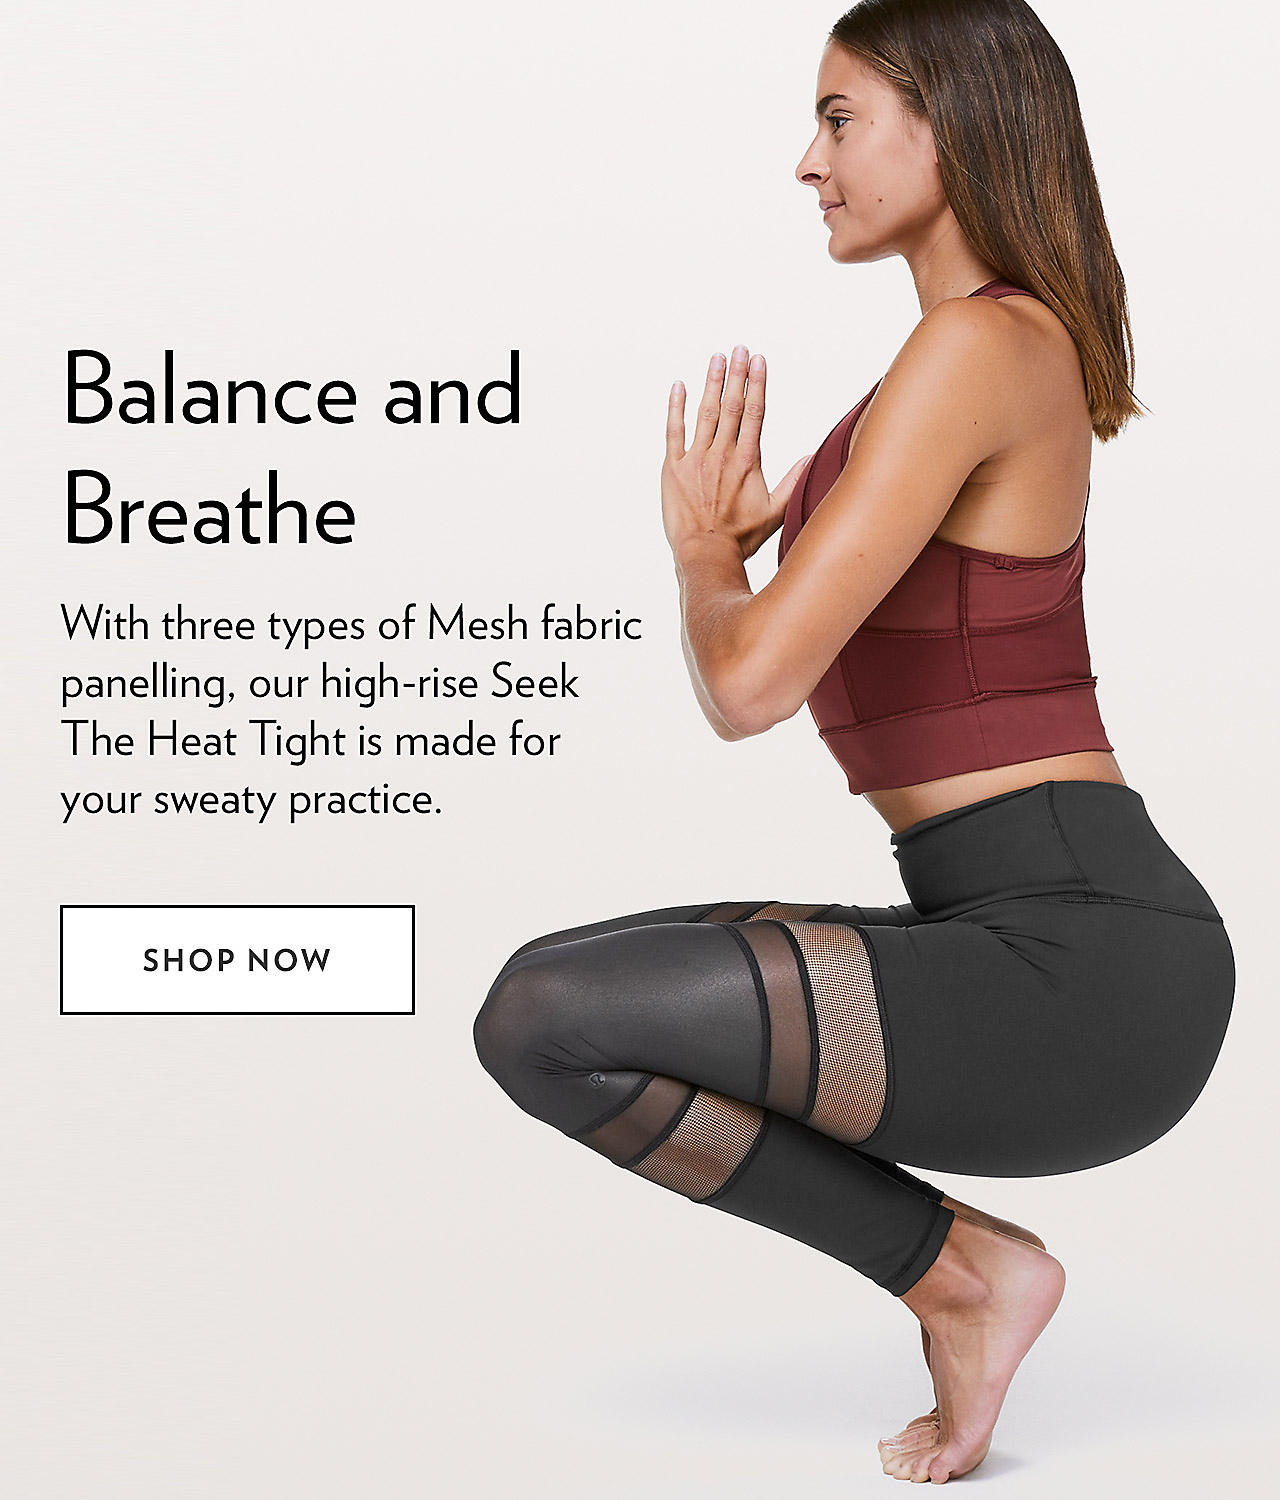 Balance and Breathe - SHOP NOW